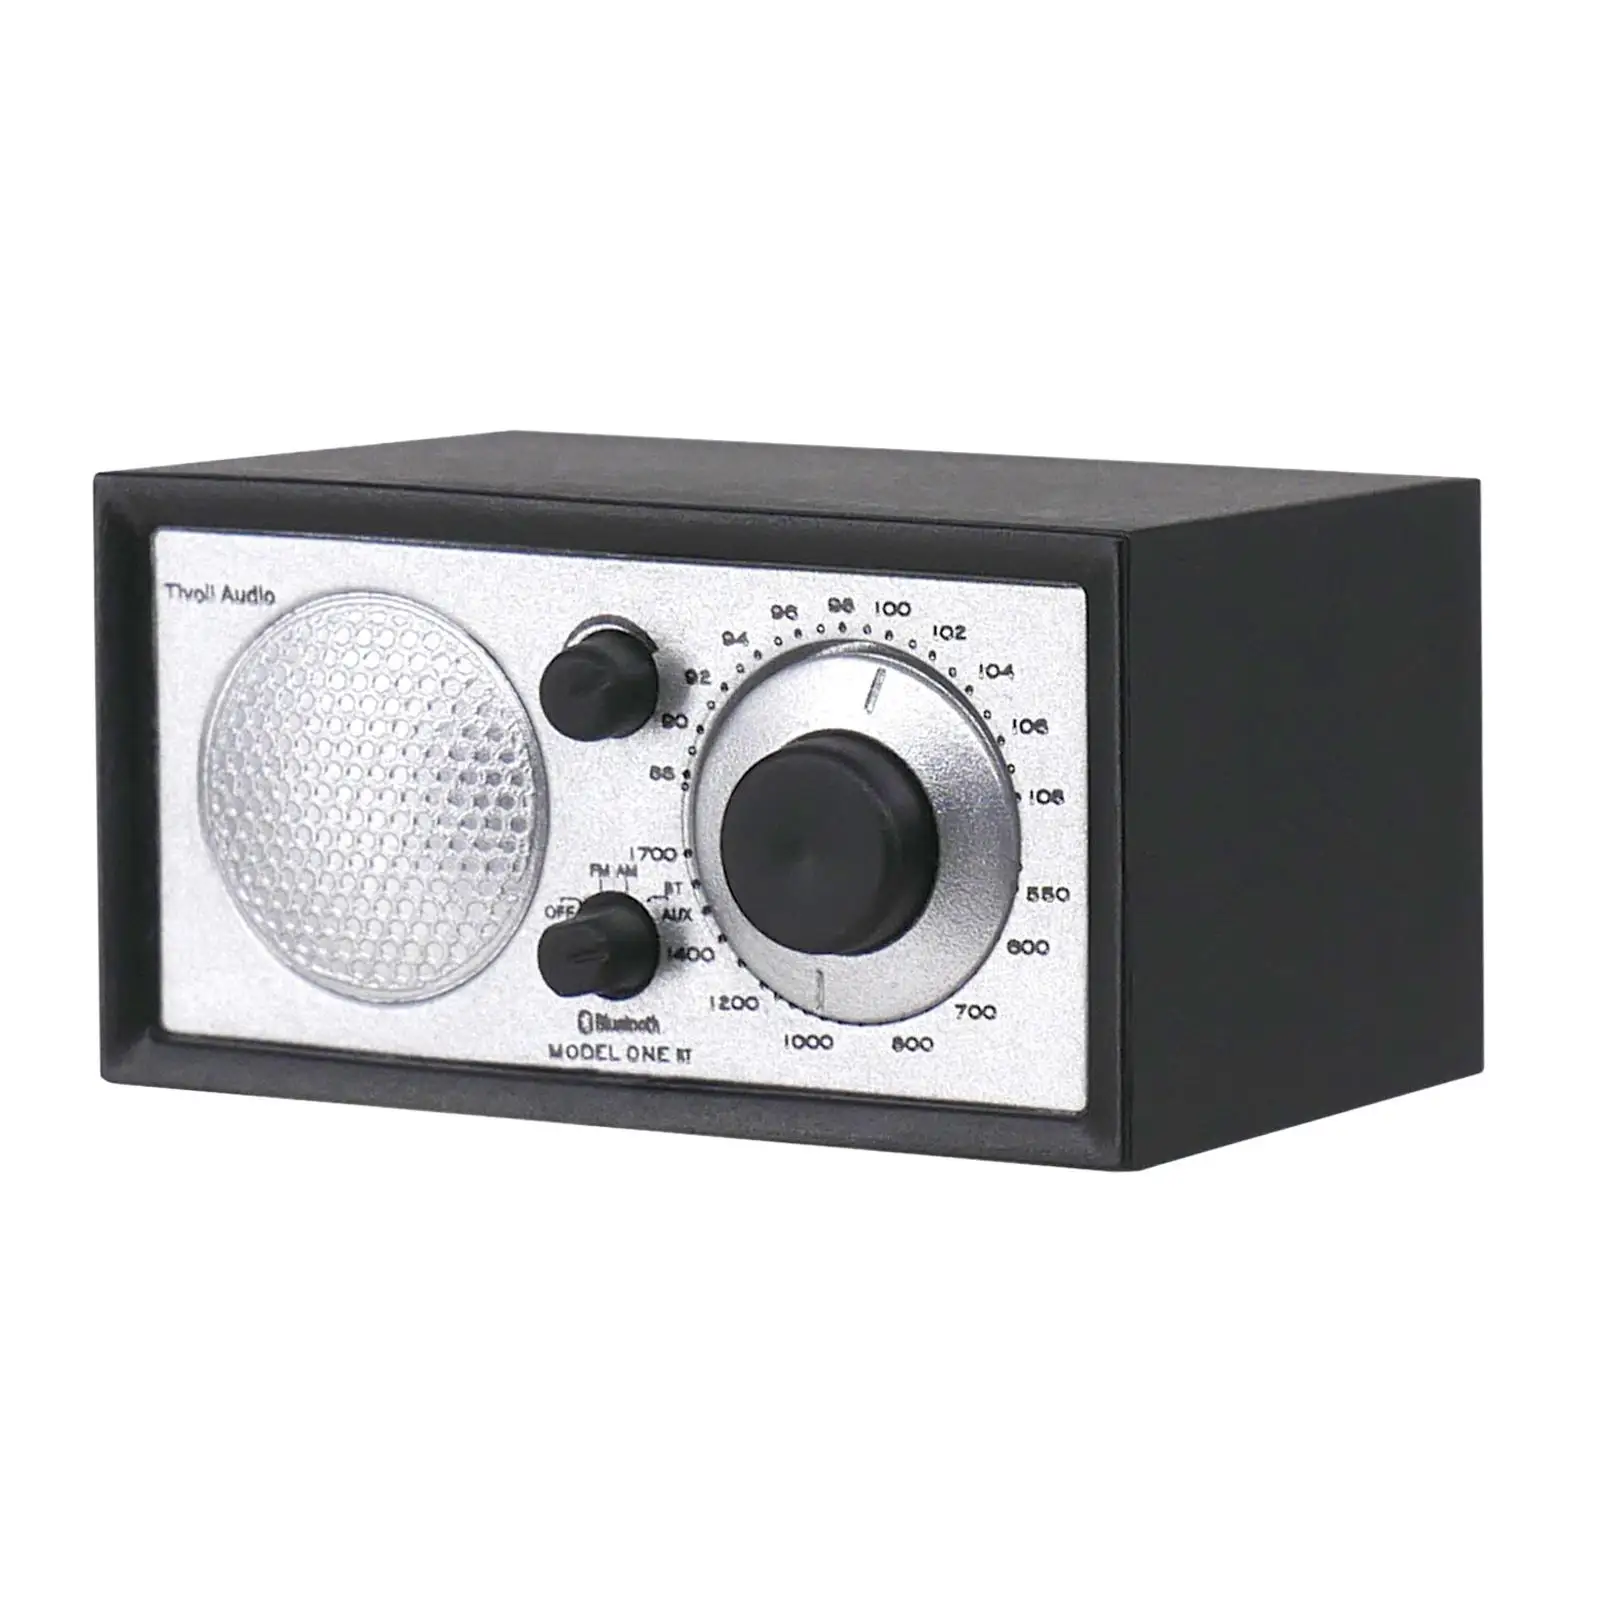 1/6 Dollhouse Radio Home Decoration Accessories Photo Props Miniature Radio Model for Study Bedroom Living Room Decoration